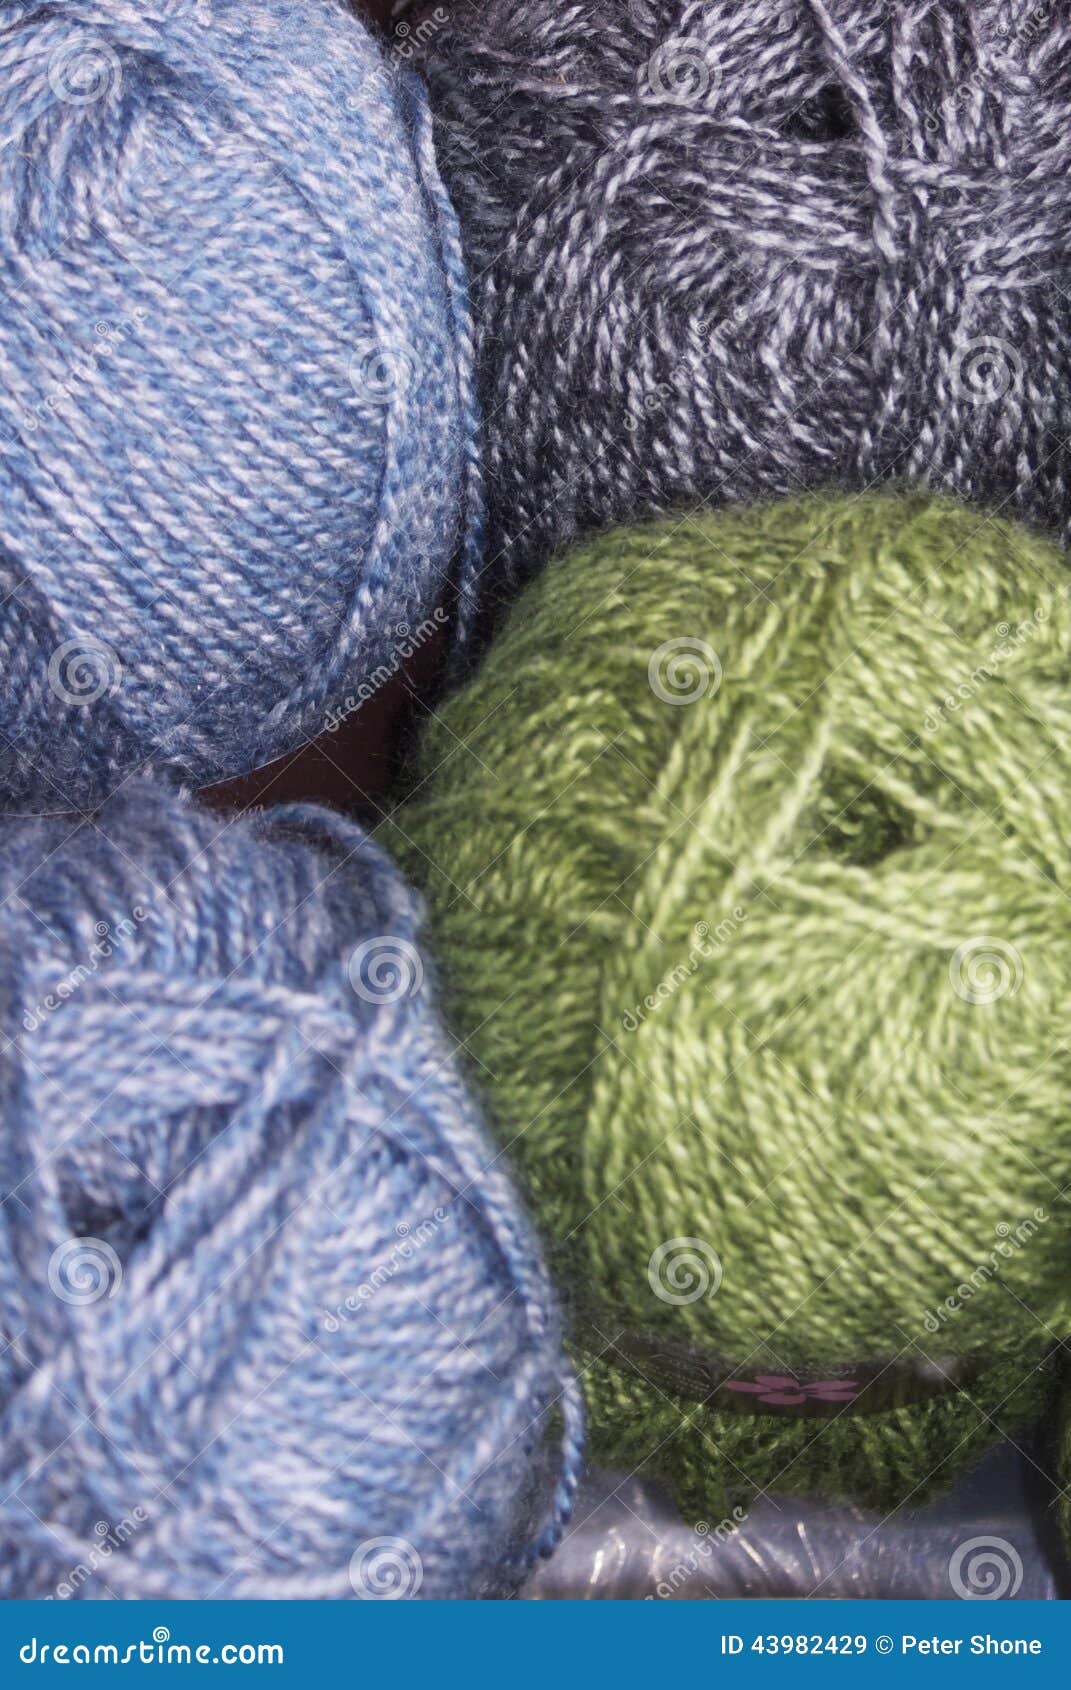 Colourful balls of wool stock image. Image of knitting - 43982429